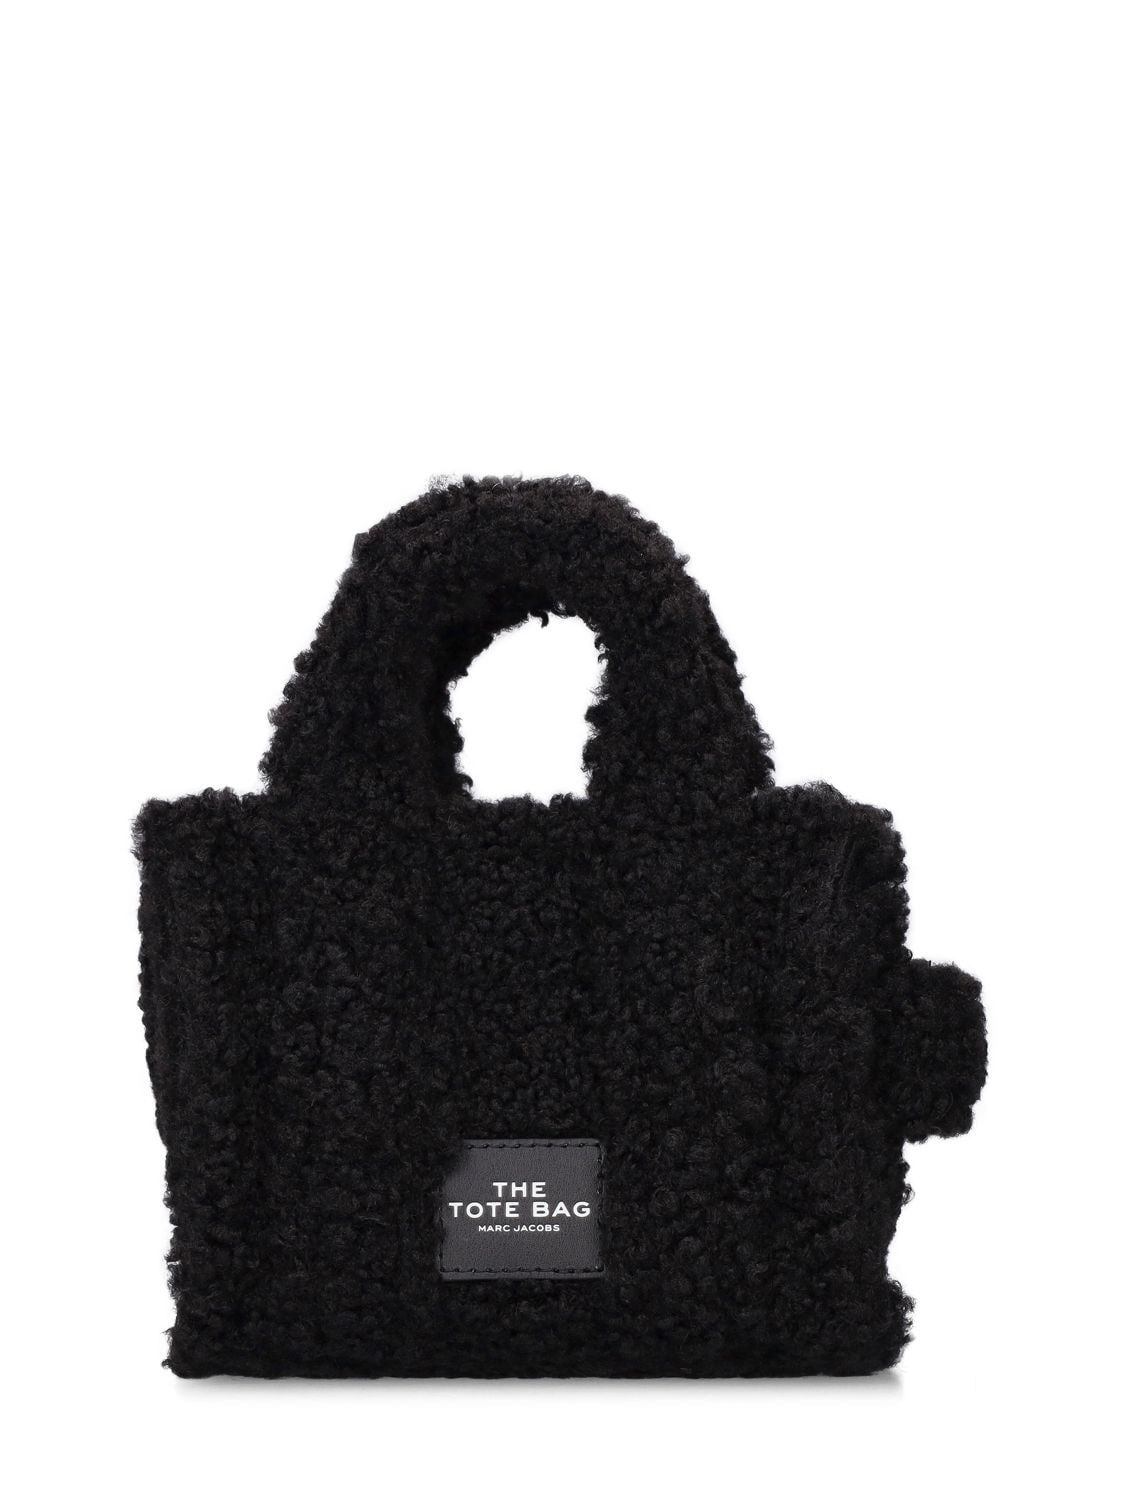 MARC JACOBS (THE) Micro Faux Teddy Tote Bag